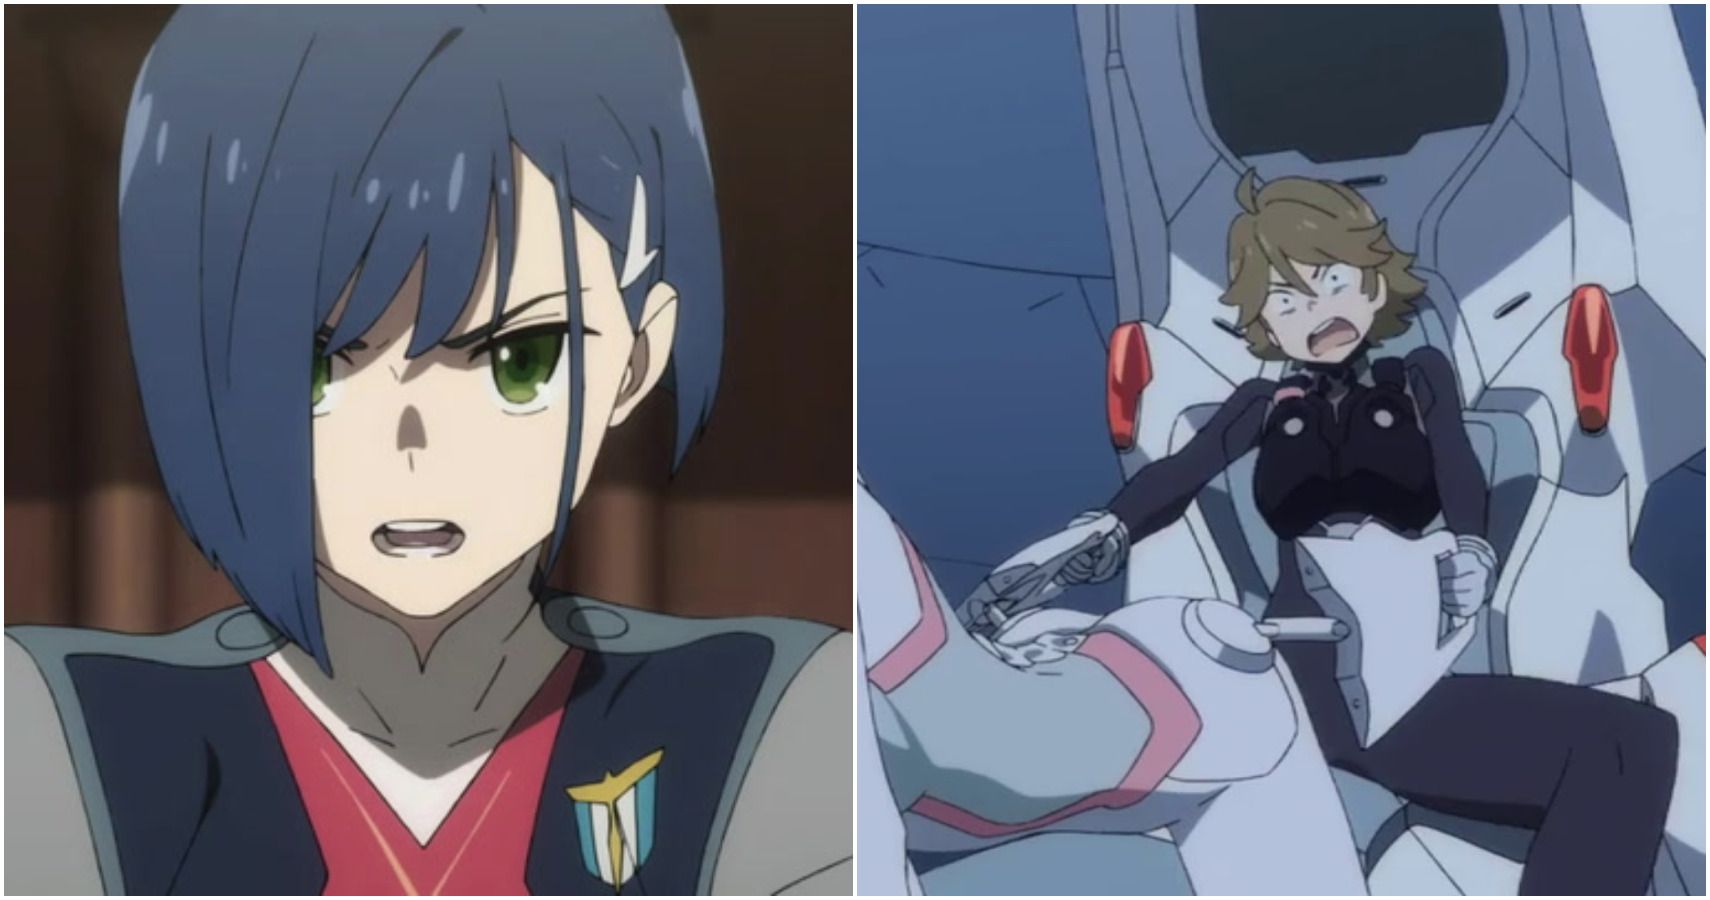 Darling In The Franxx: 10 Burning Questions That The Finale Left Us With